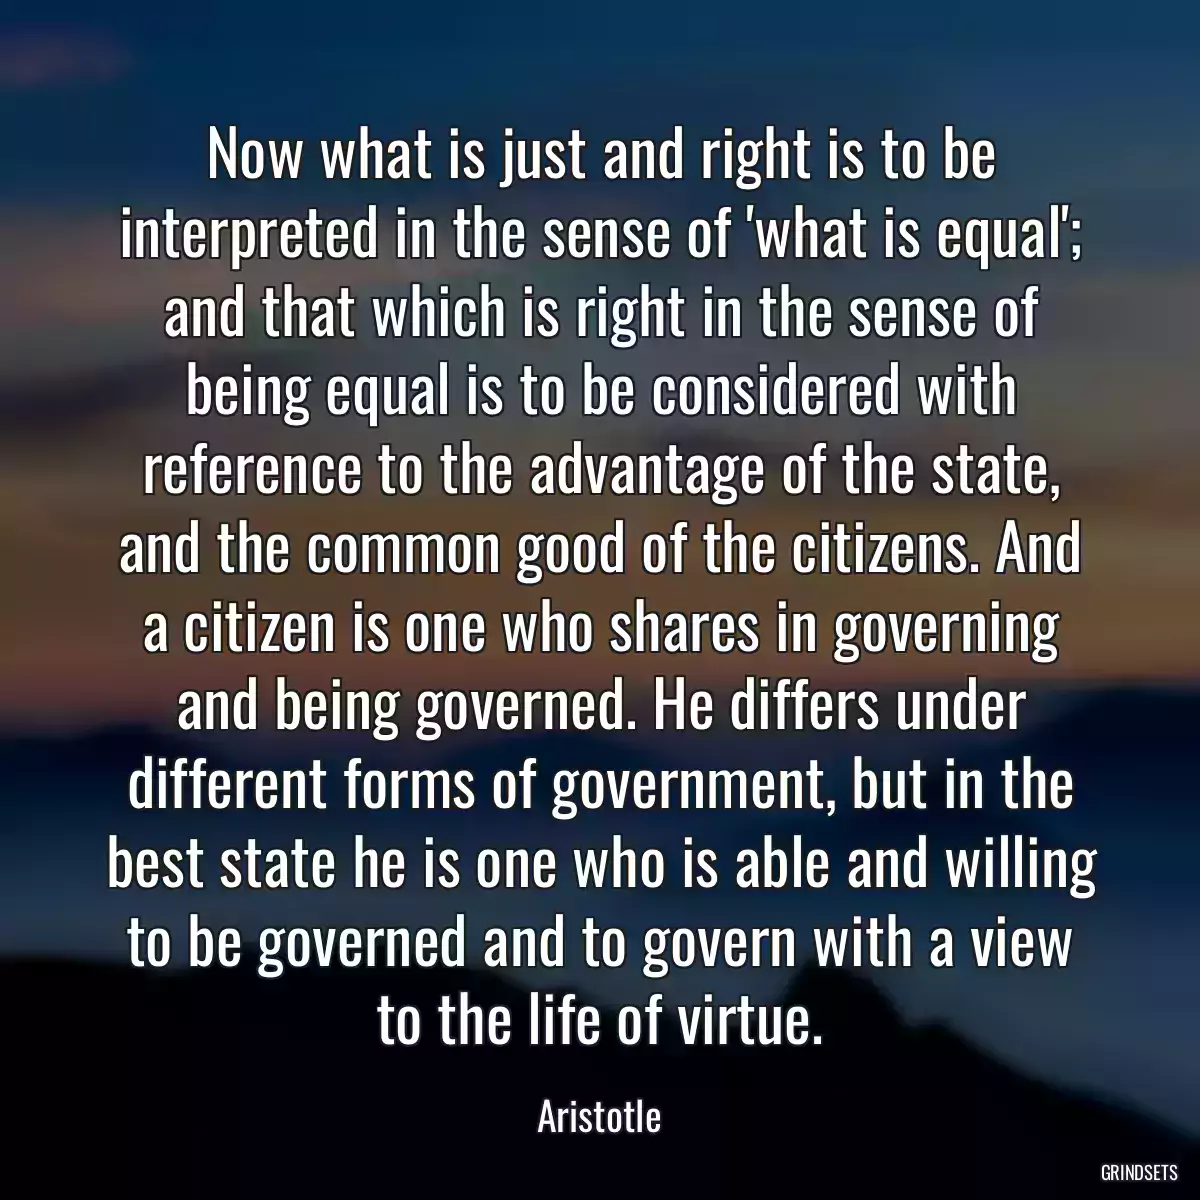 Now what is just and right is to be interpreted in the sense of \'what is equal\'; and that which is right in the sense of being equal is to be considered with reference to the advantage of the state, and the common good of the citizens. And a citizen is one who shares in governing and being governed. He differs under different forms of government, but in the best state he is one who is able and willing to be governed and to govern with a view to the life of virtue.